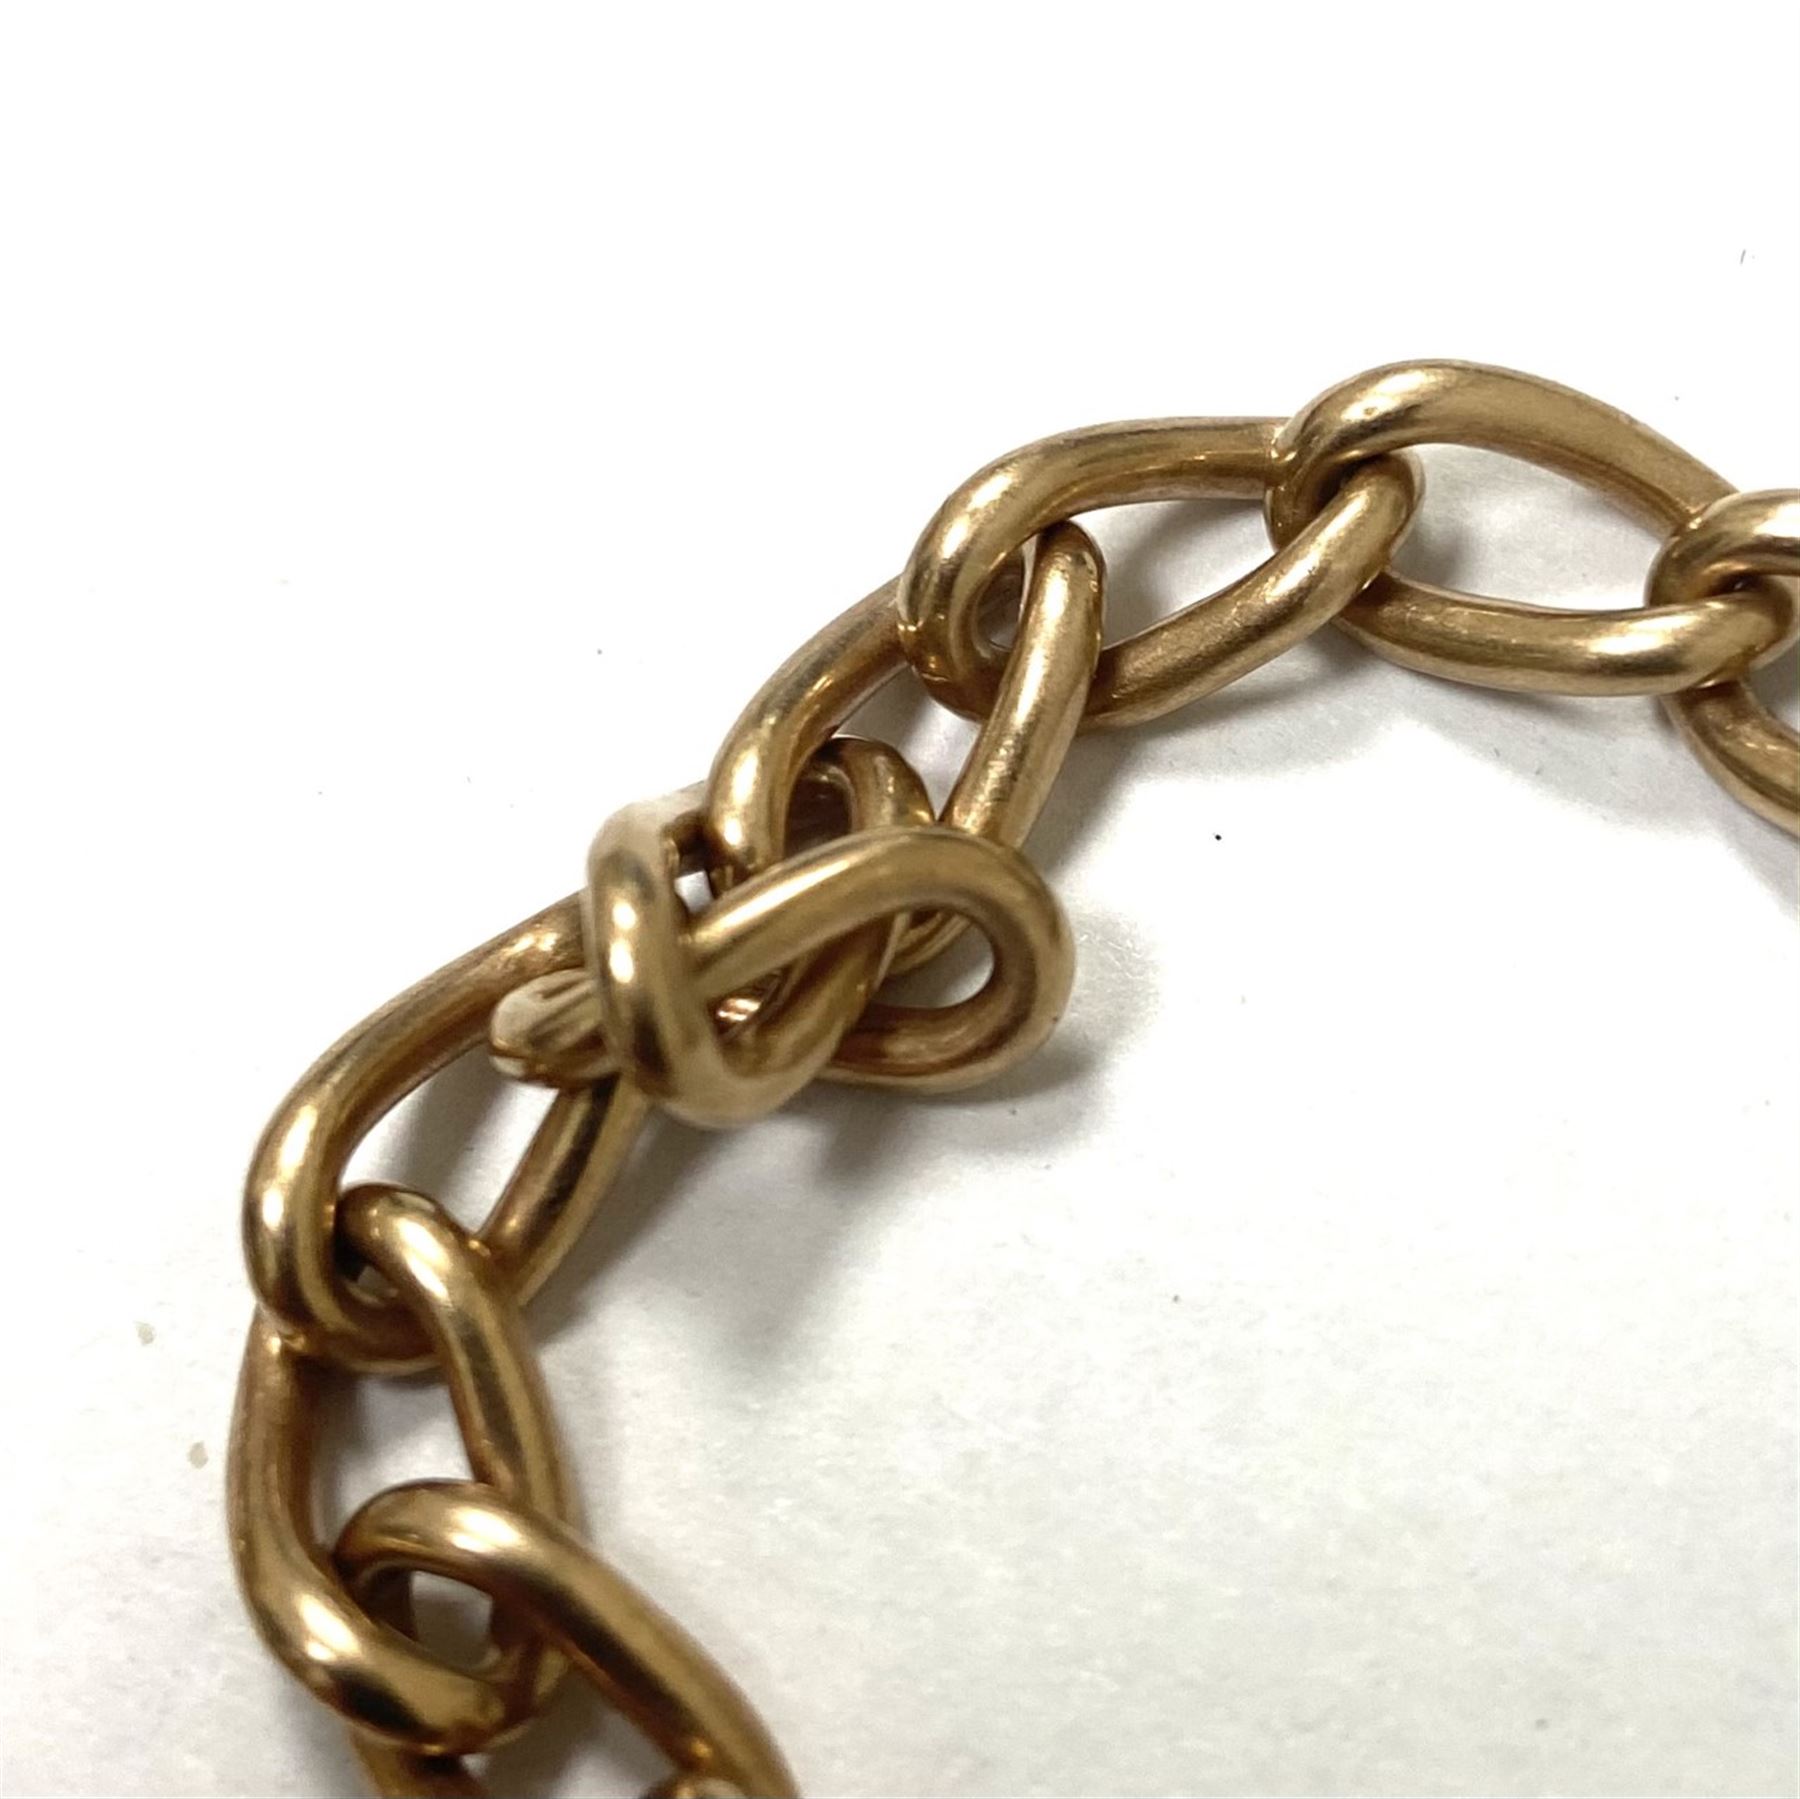 Early 20th century 9ct gold Albert T bar watch chain with spring clip - Image 2 of 4